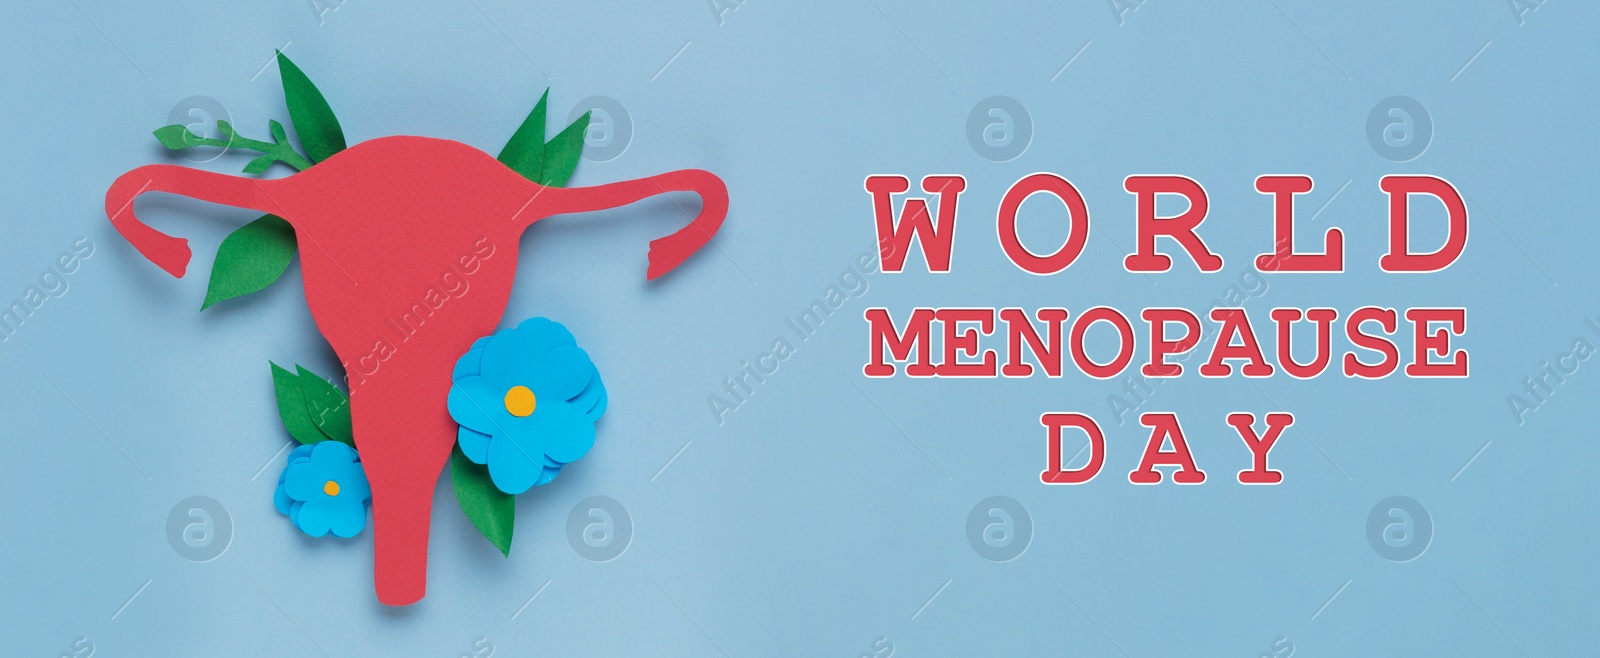 Image of World Menopause Day, banner design. Paper uterus and flowers on light blue background, top view